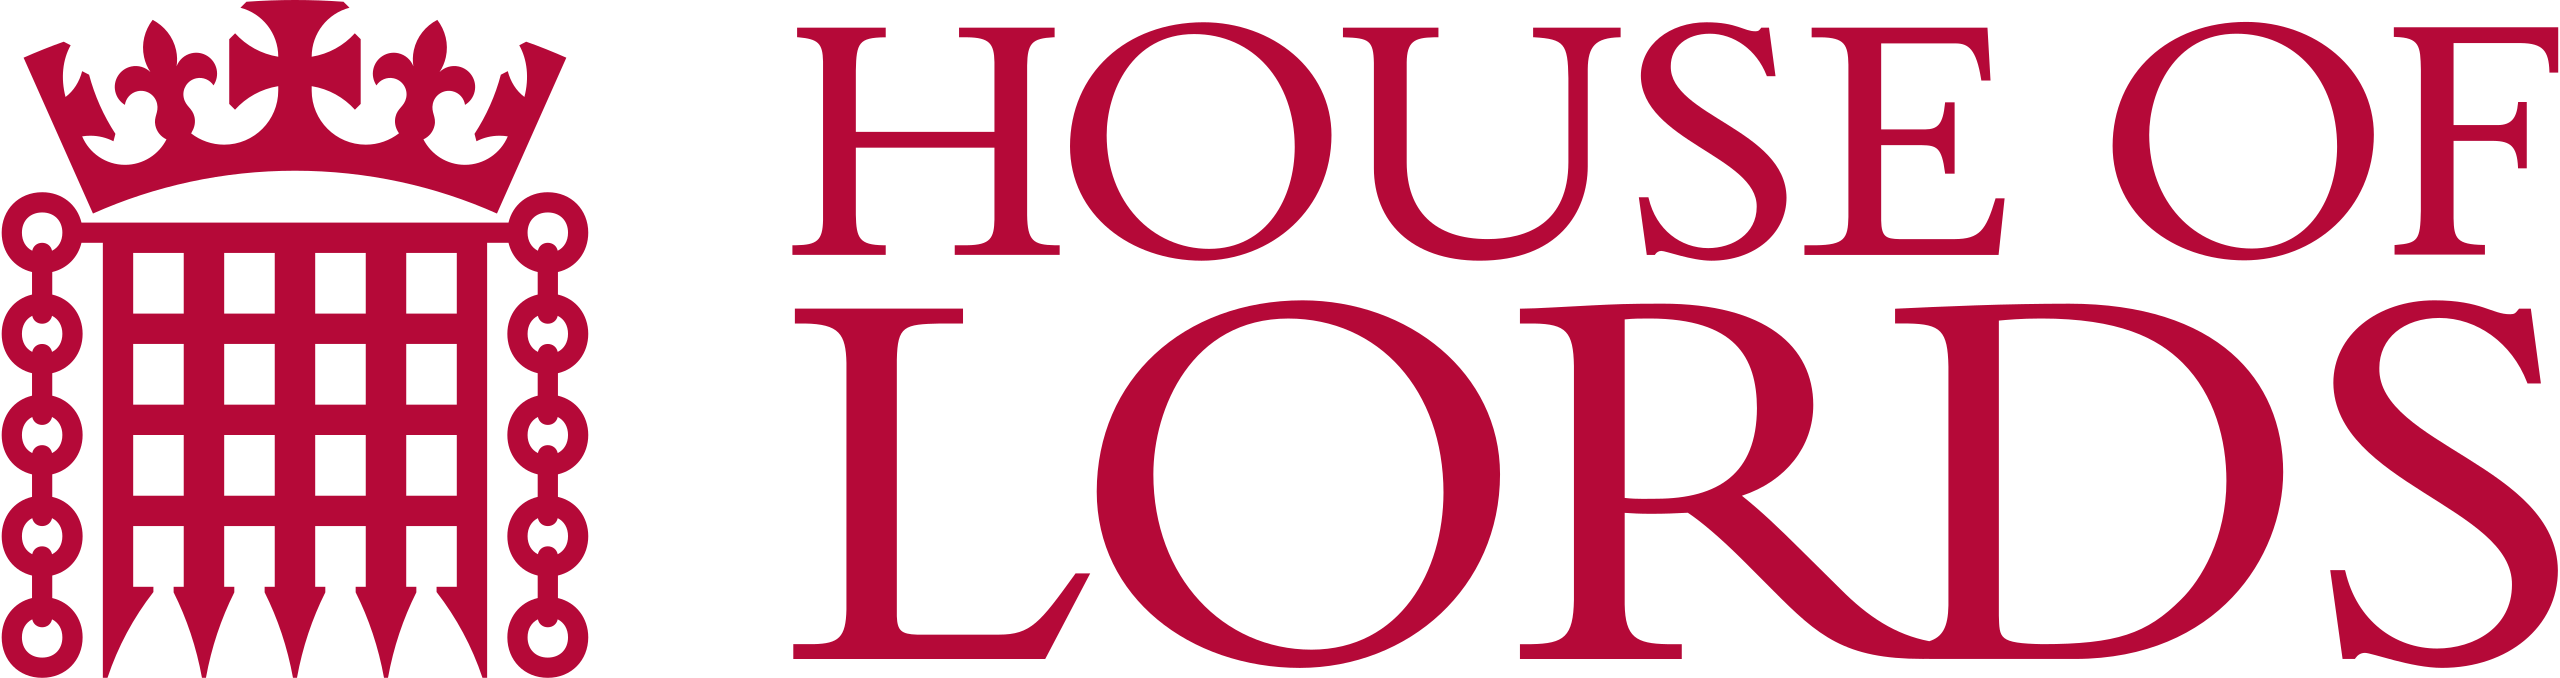 House_of_Lords_logo_2020.svg